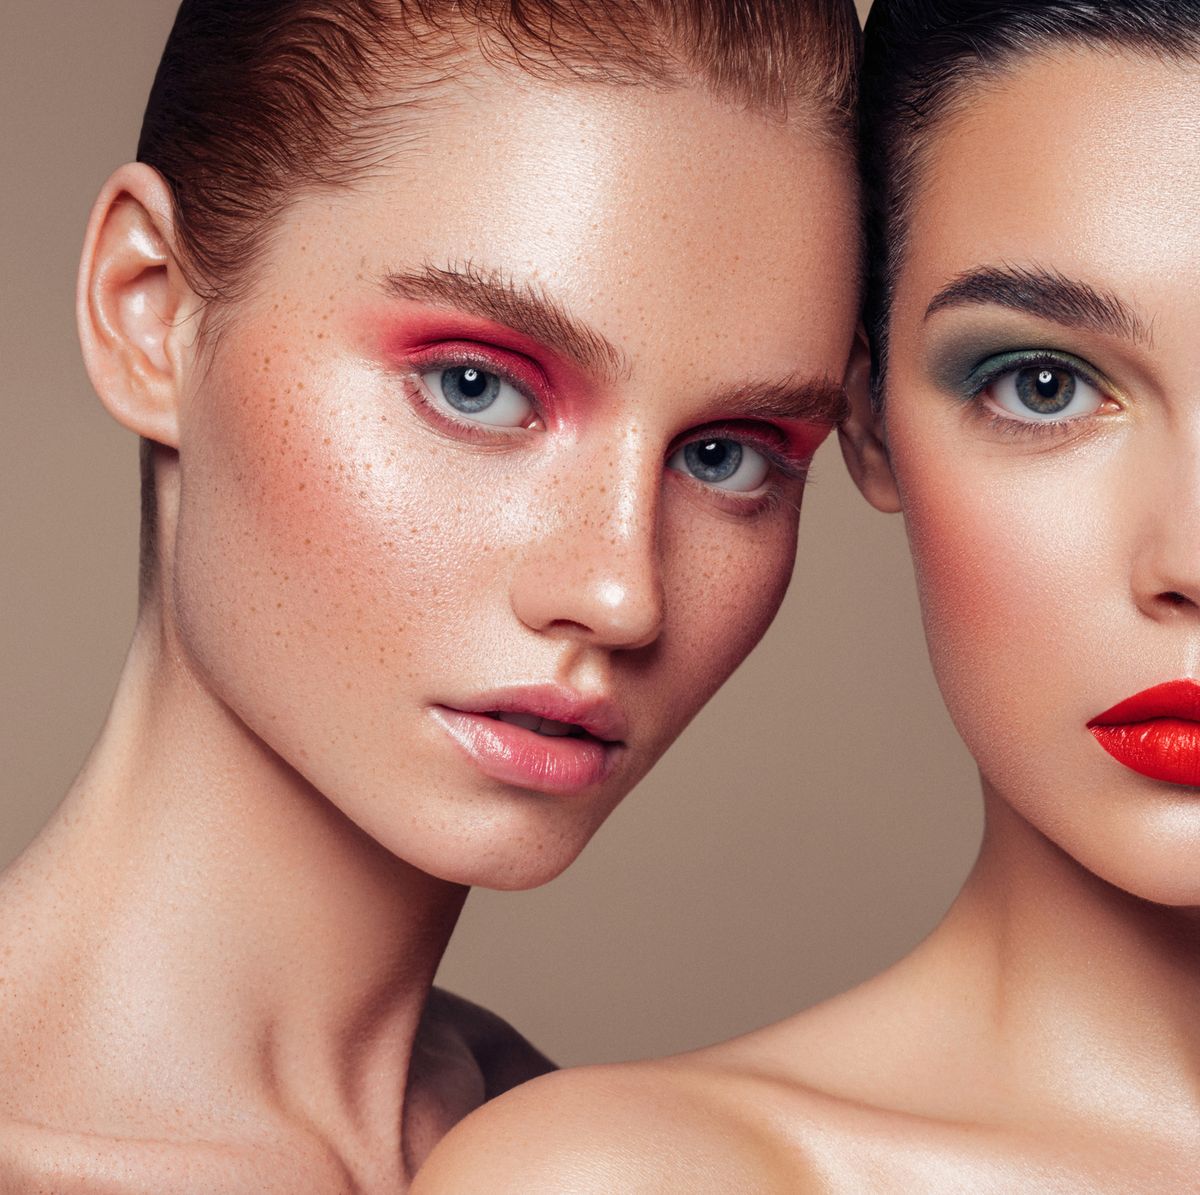 7 Hot New Makeup Trends To Try In 2022